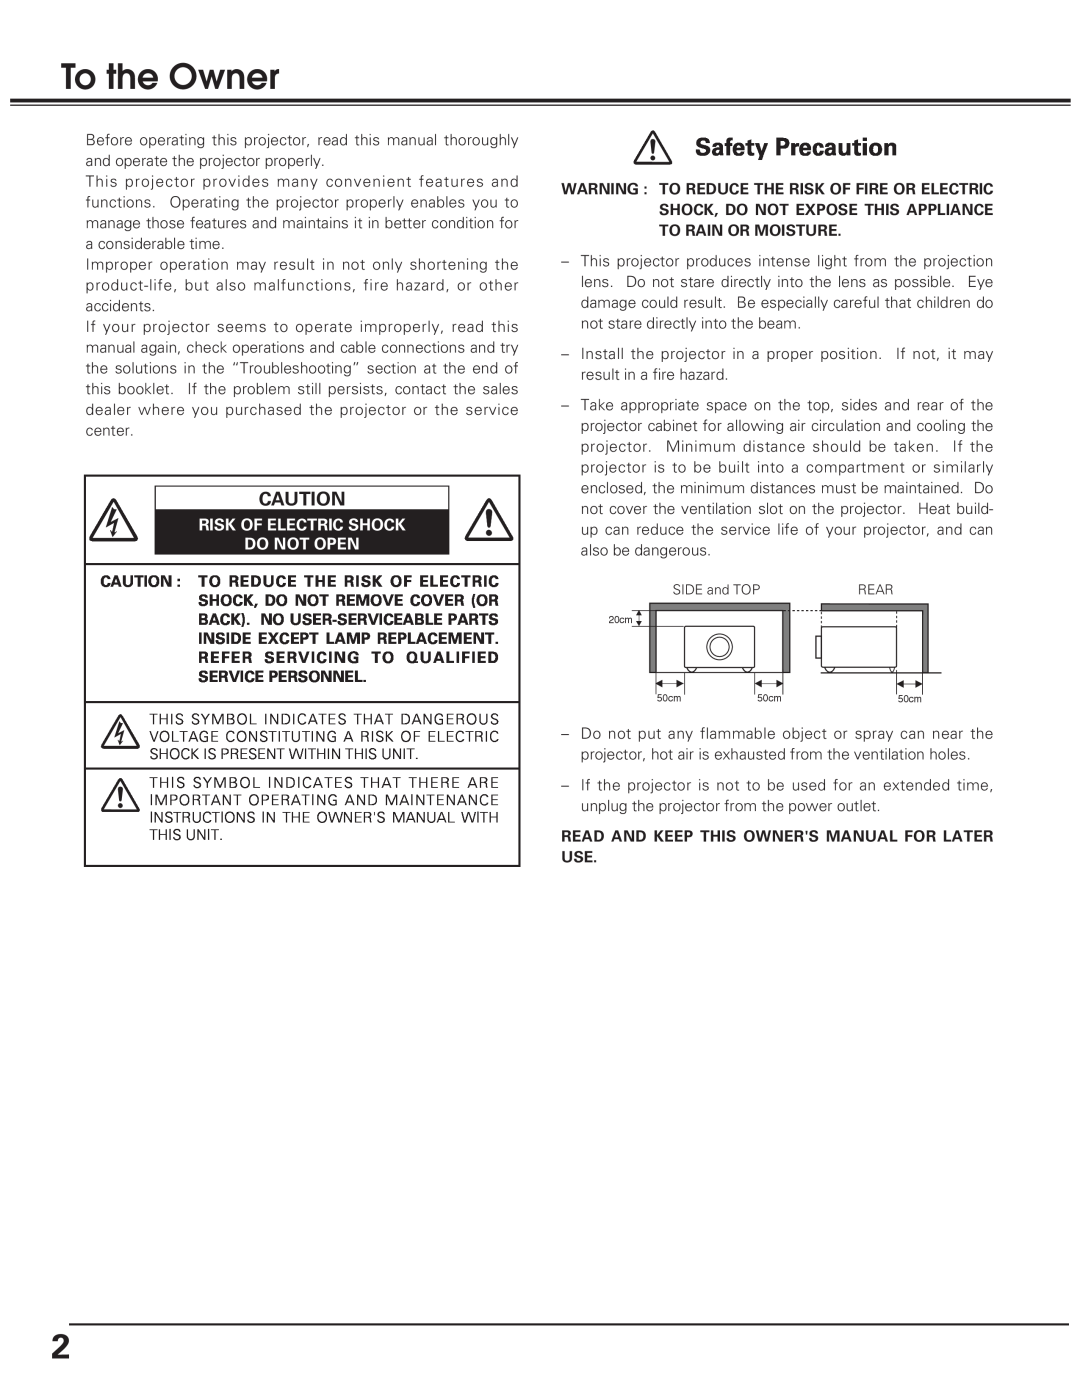 Eiki LC-SD10 owner manual To the Owner, Safety Precaution, Risk Of Electric Shock Do Not Open 